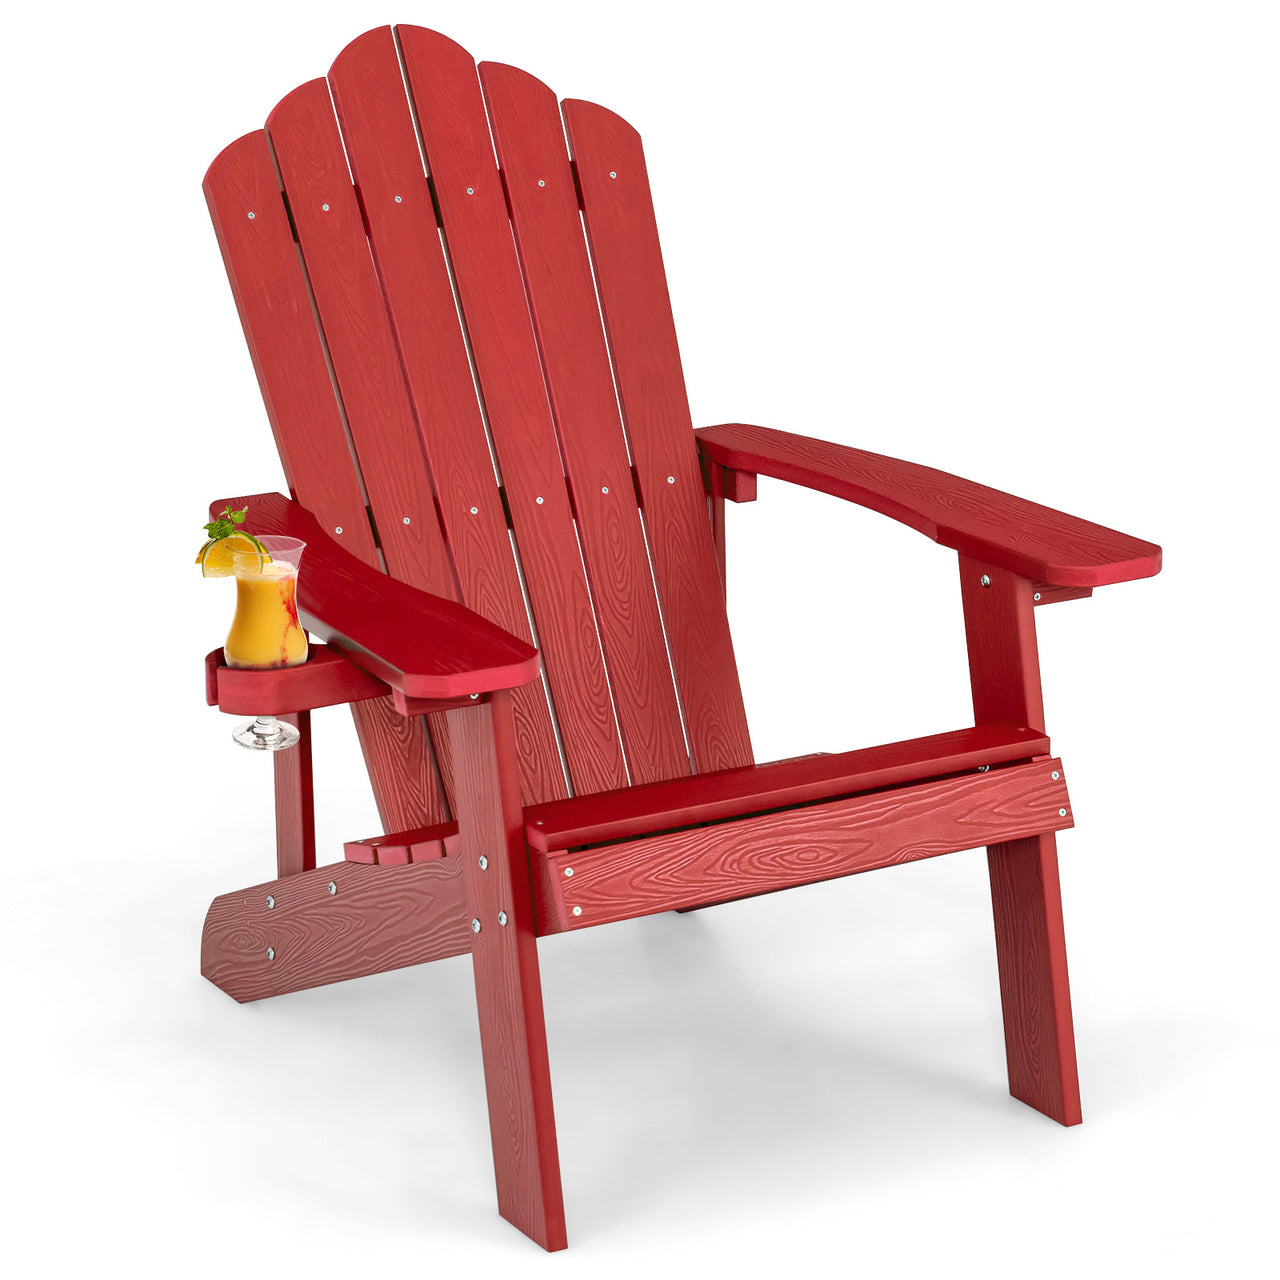 Weather Resistant HIPS Outdoor Adirondack Chair with Cup Holder - Gallery View 1 of 11